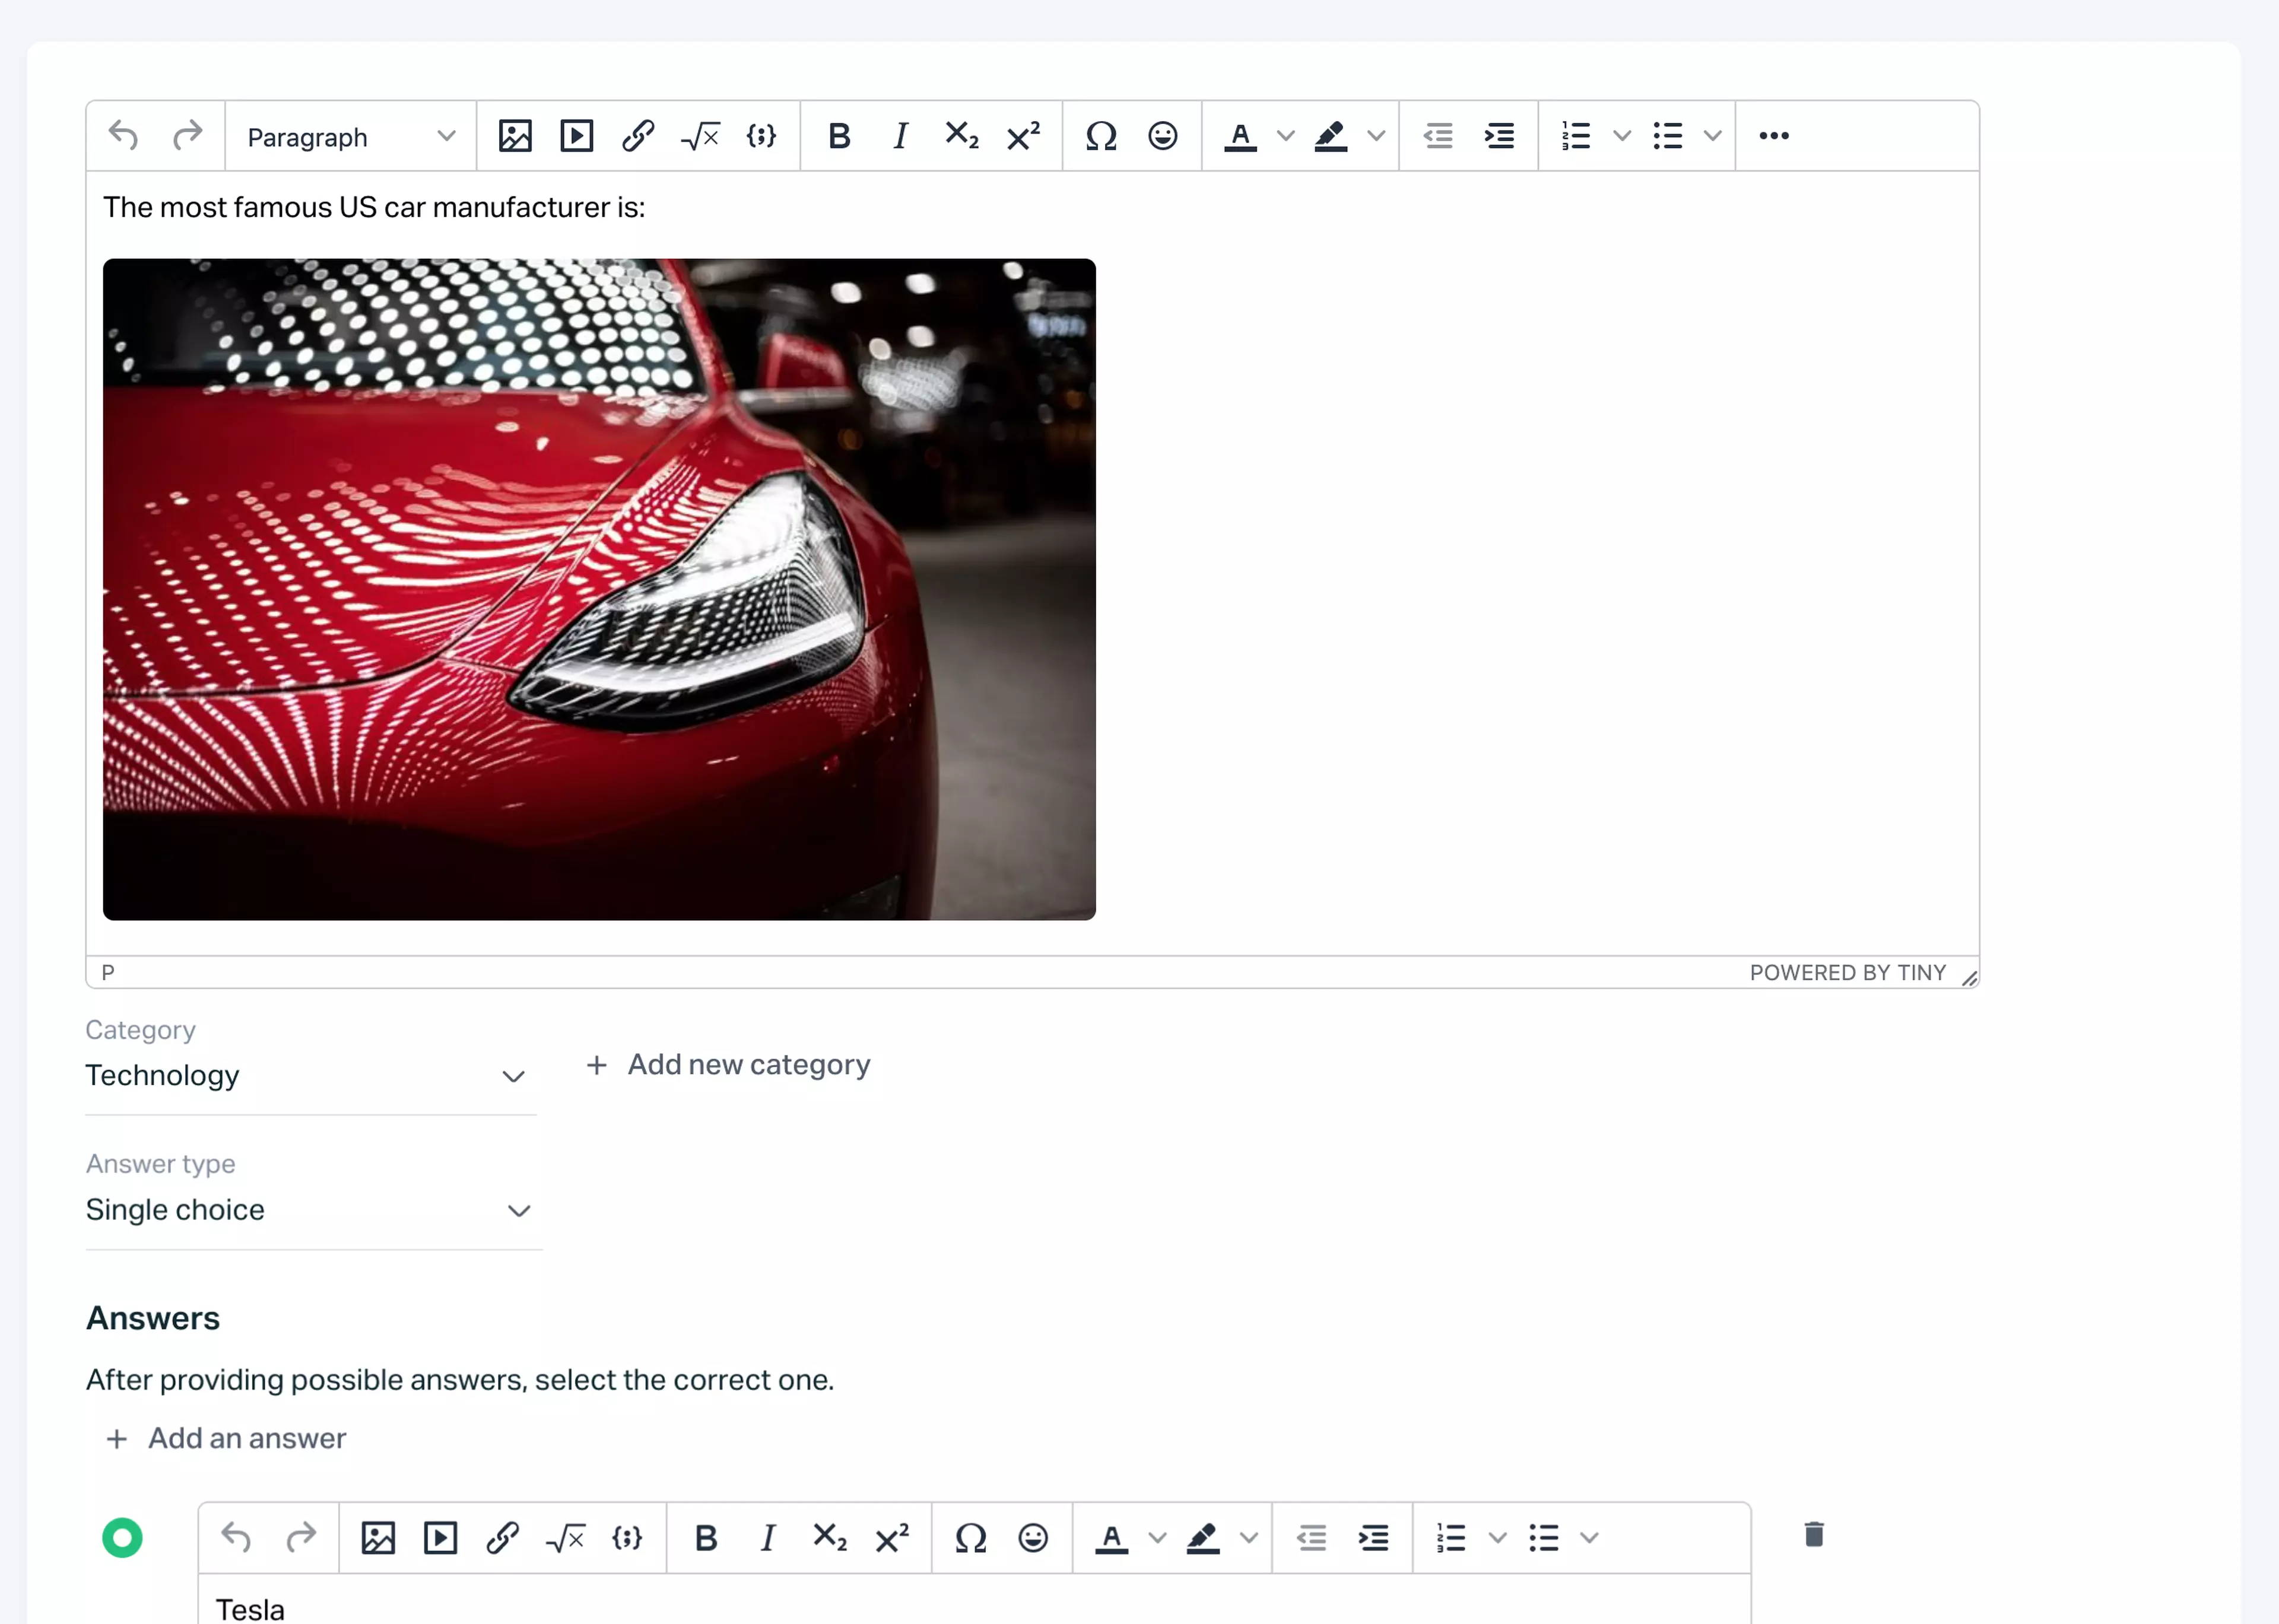 Testportal app view with online test question including an image of a red car.